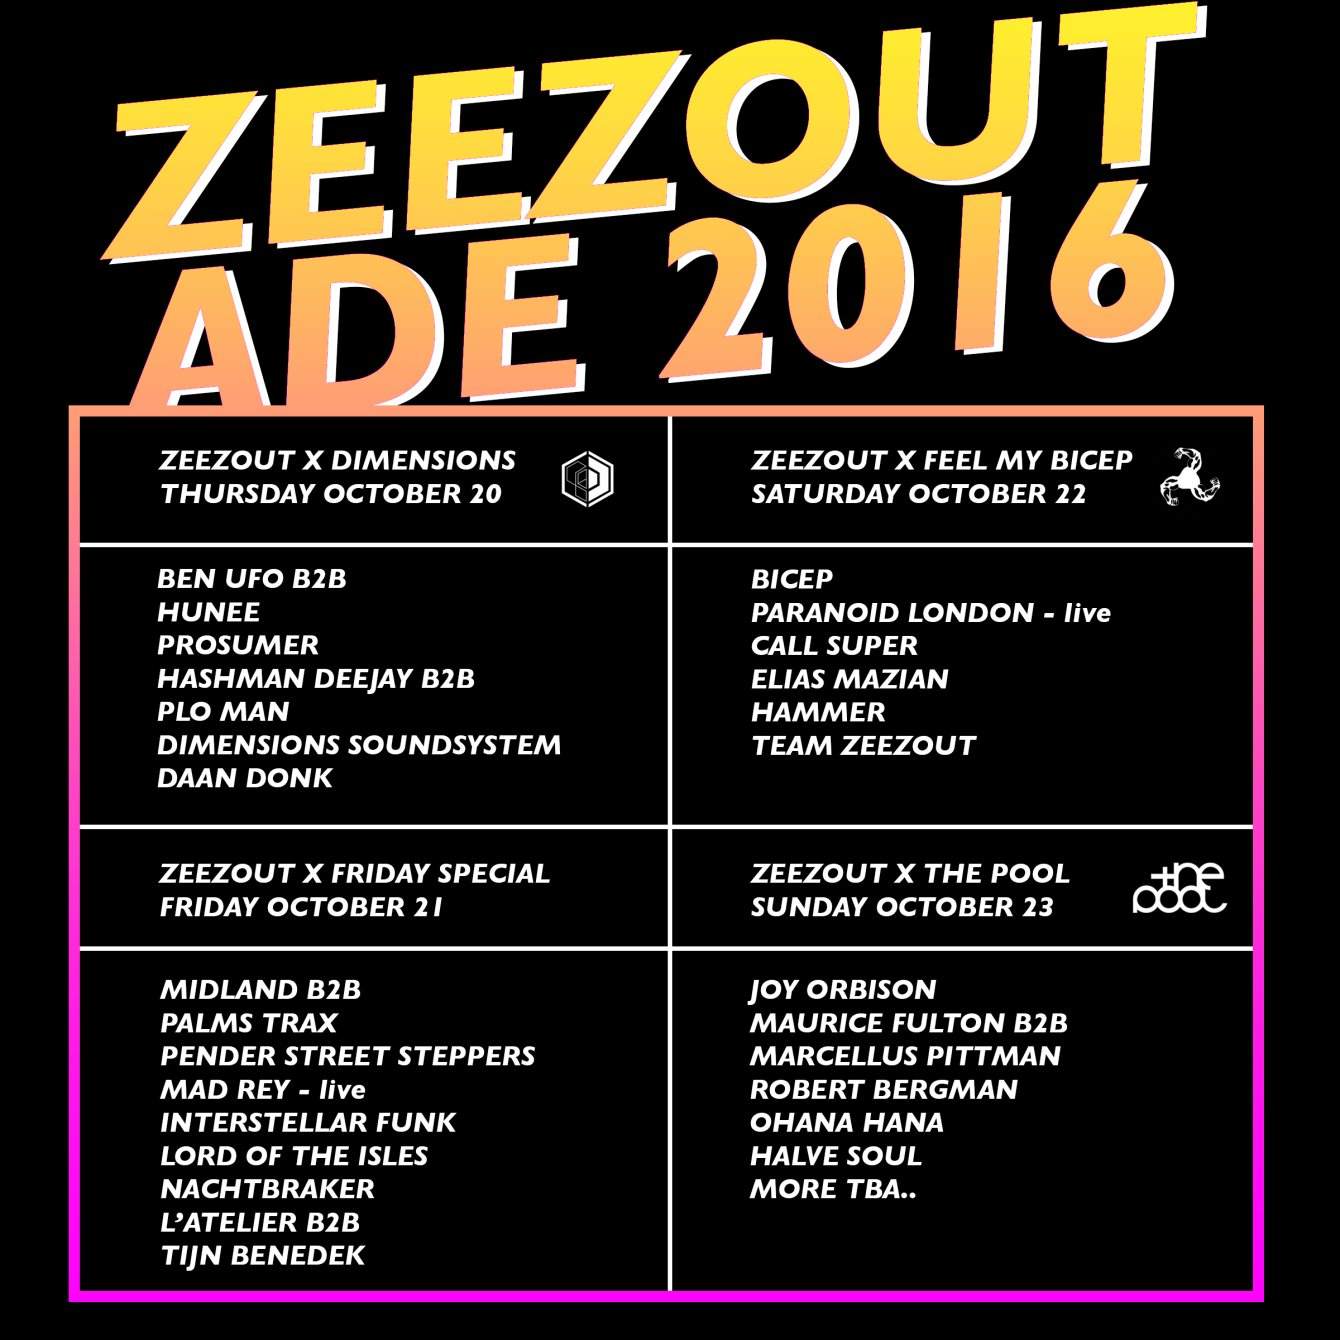 Zeezout ADE 2016: Feel My Bicep with Bicep, Paranoid London, Call Super & More - Página trasera